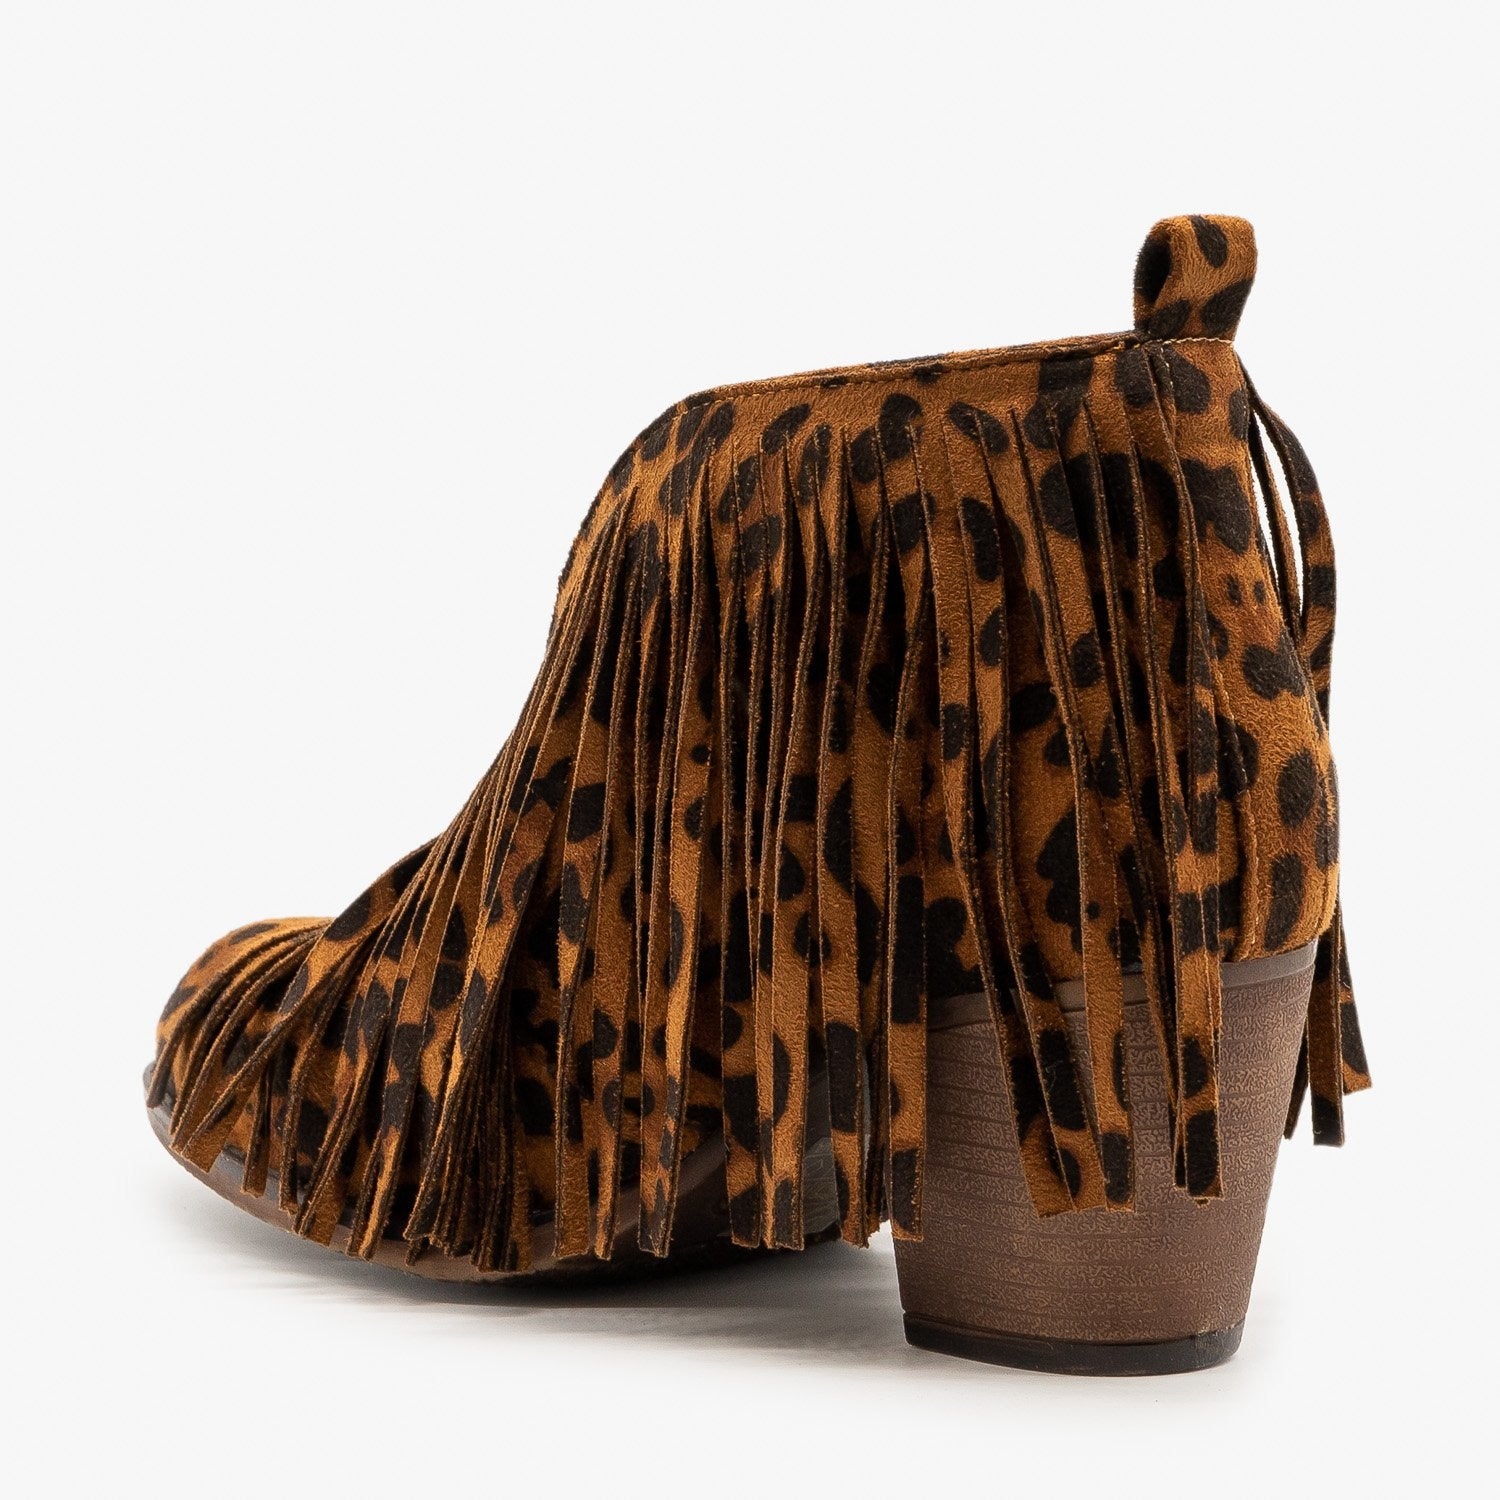 leopard boots with fringe